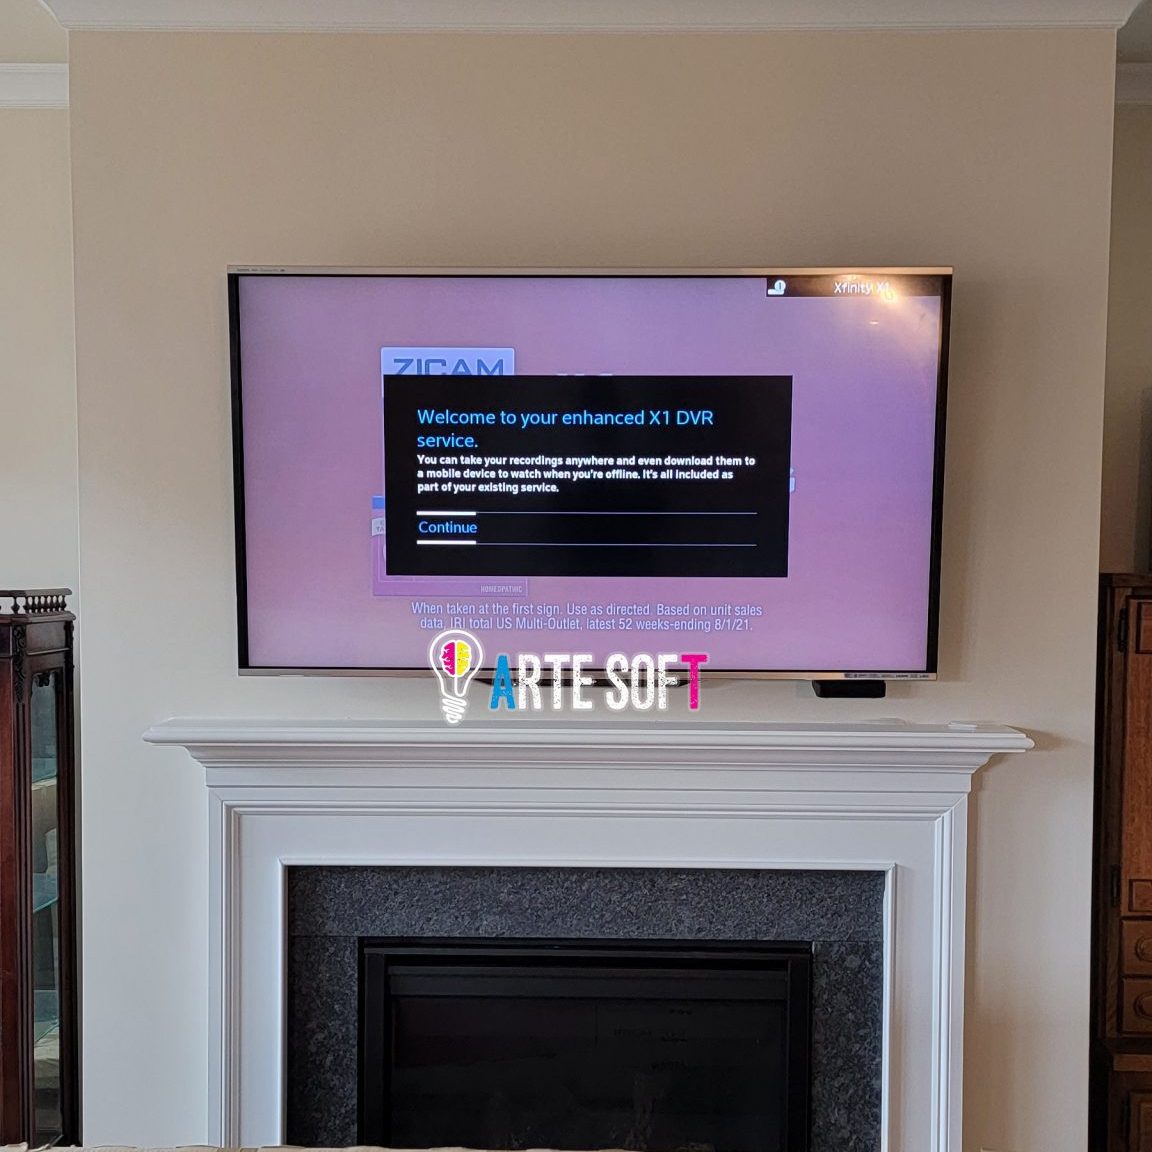 TV wall mount installation with wire concealment over fireplace